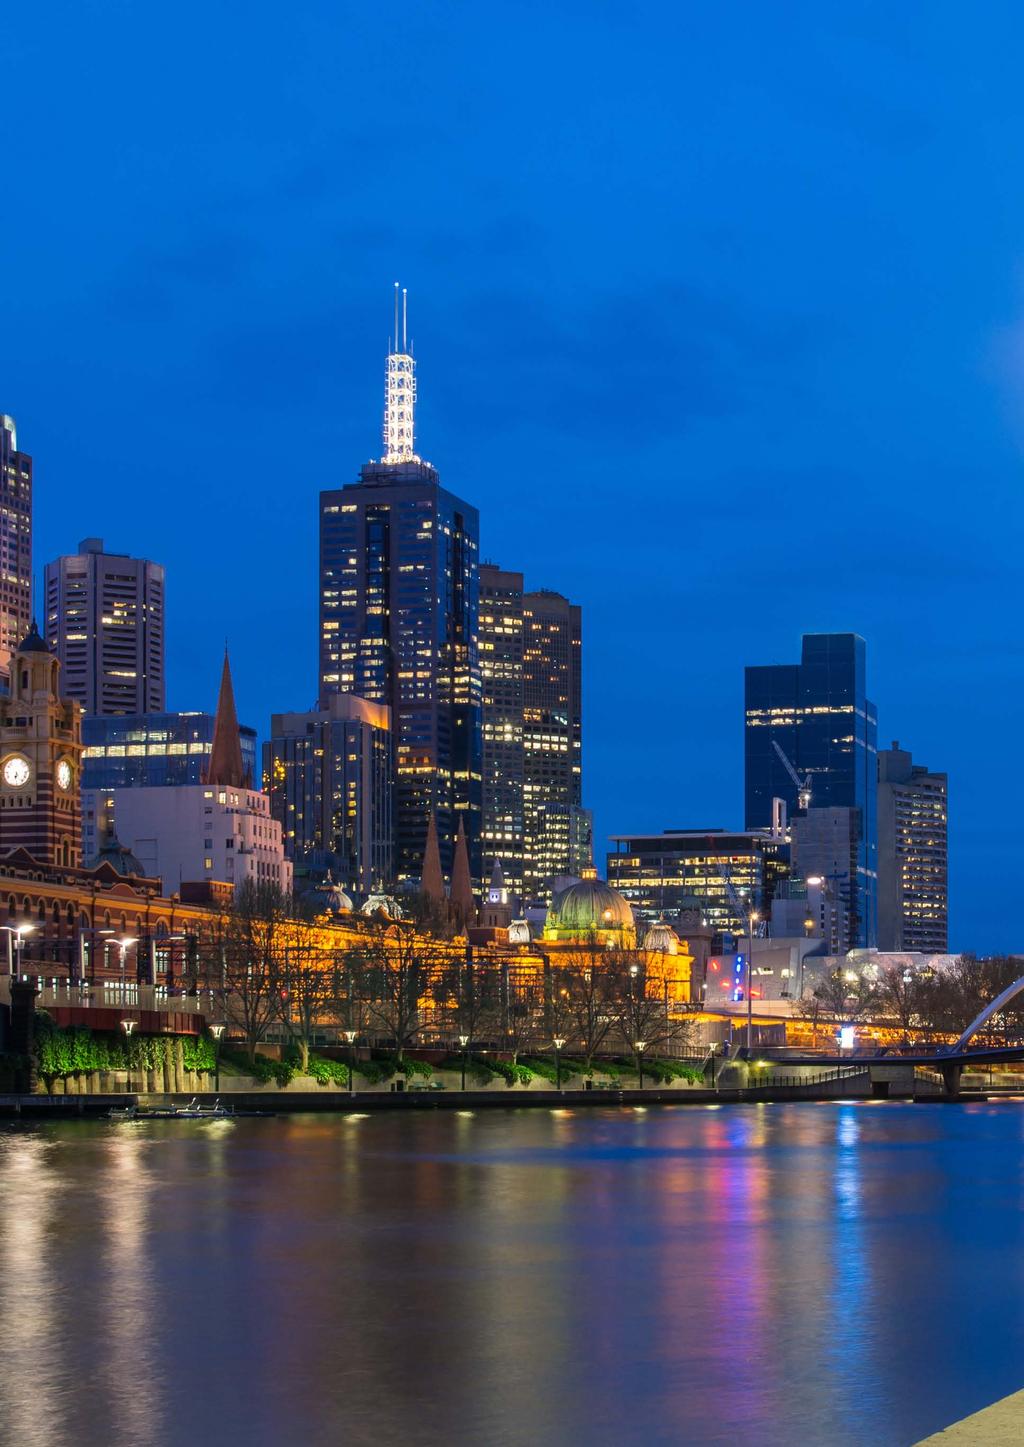 MyNews 2014 Melbourne January property news REIV: Property Outlook for 2014. Melbourne leads nation in catering for population growth. Avalon airport rail link reaches planning milestone.